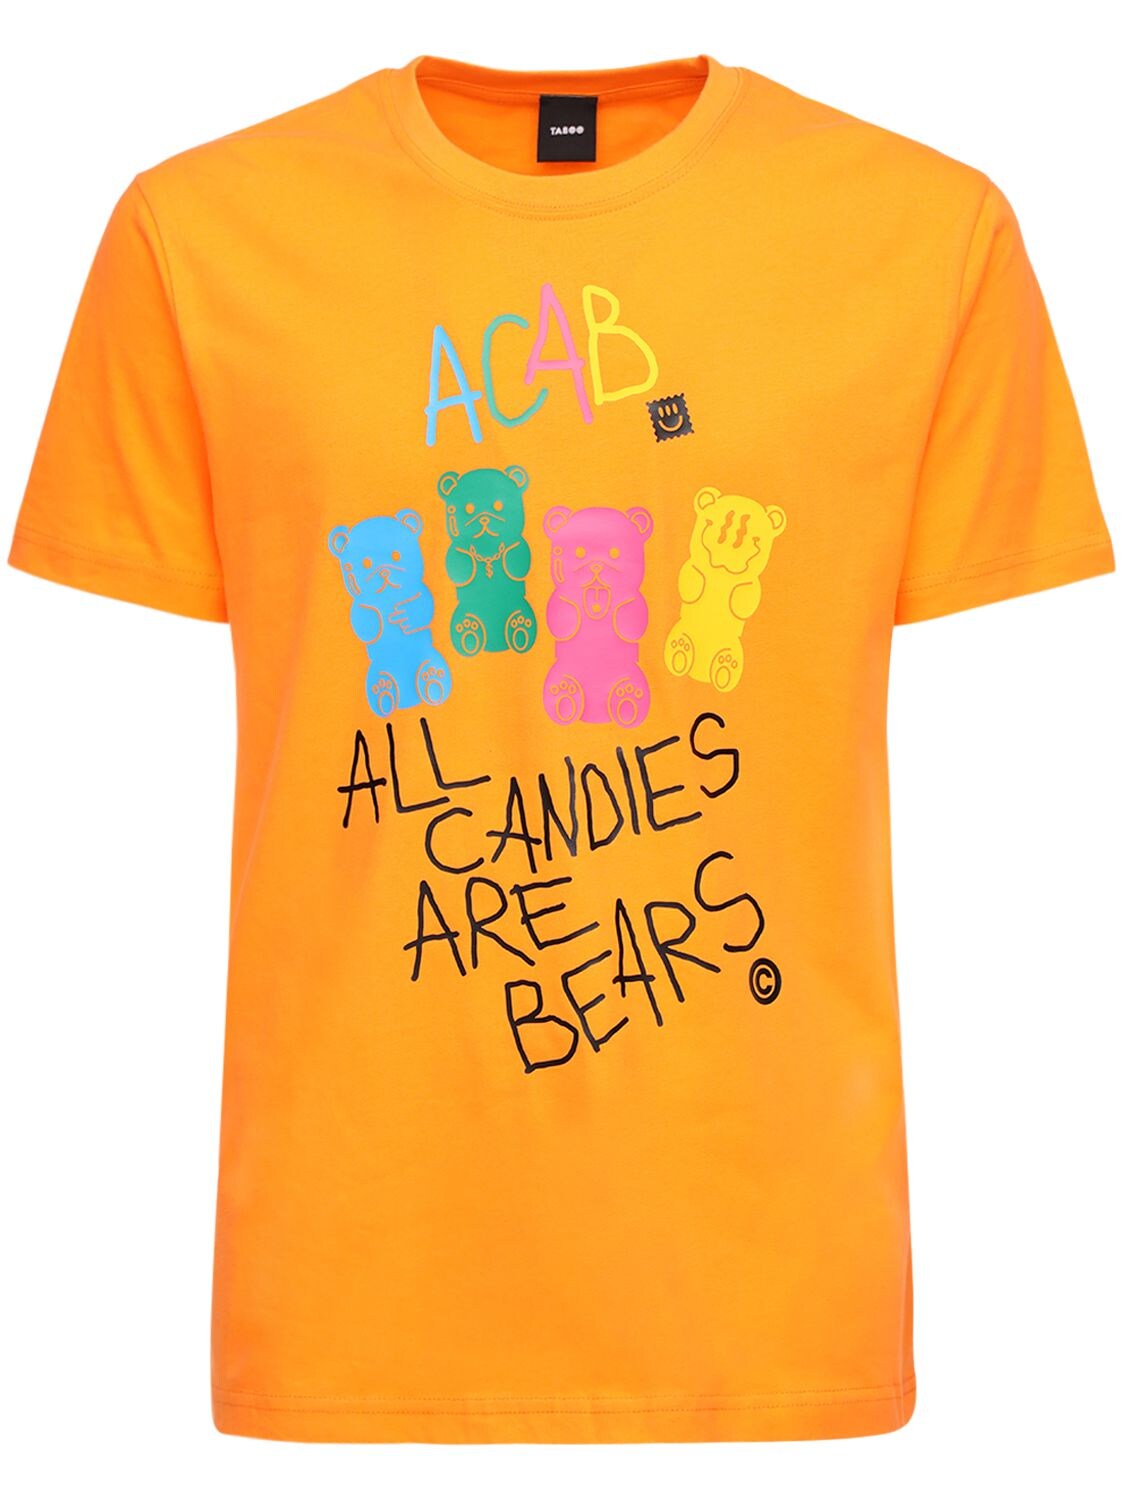 Taboo All Candies Are Bears Printed T-shirt In Orange